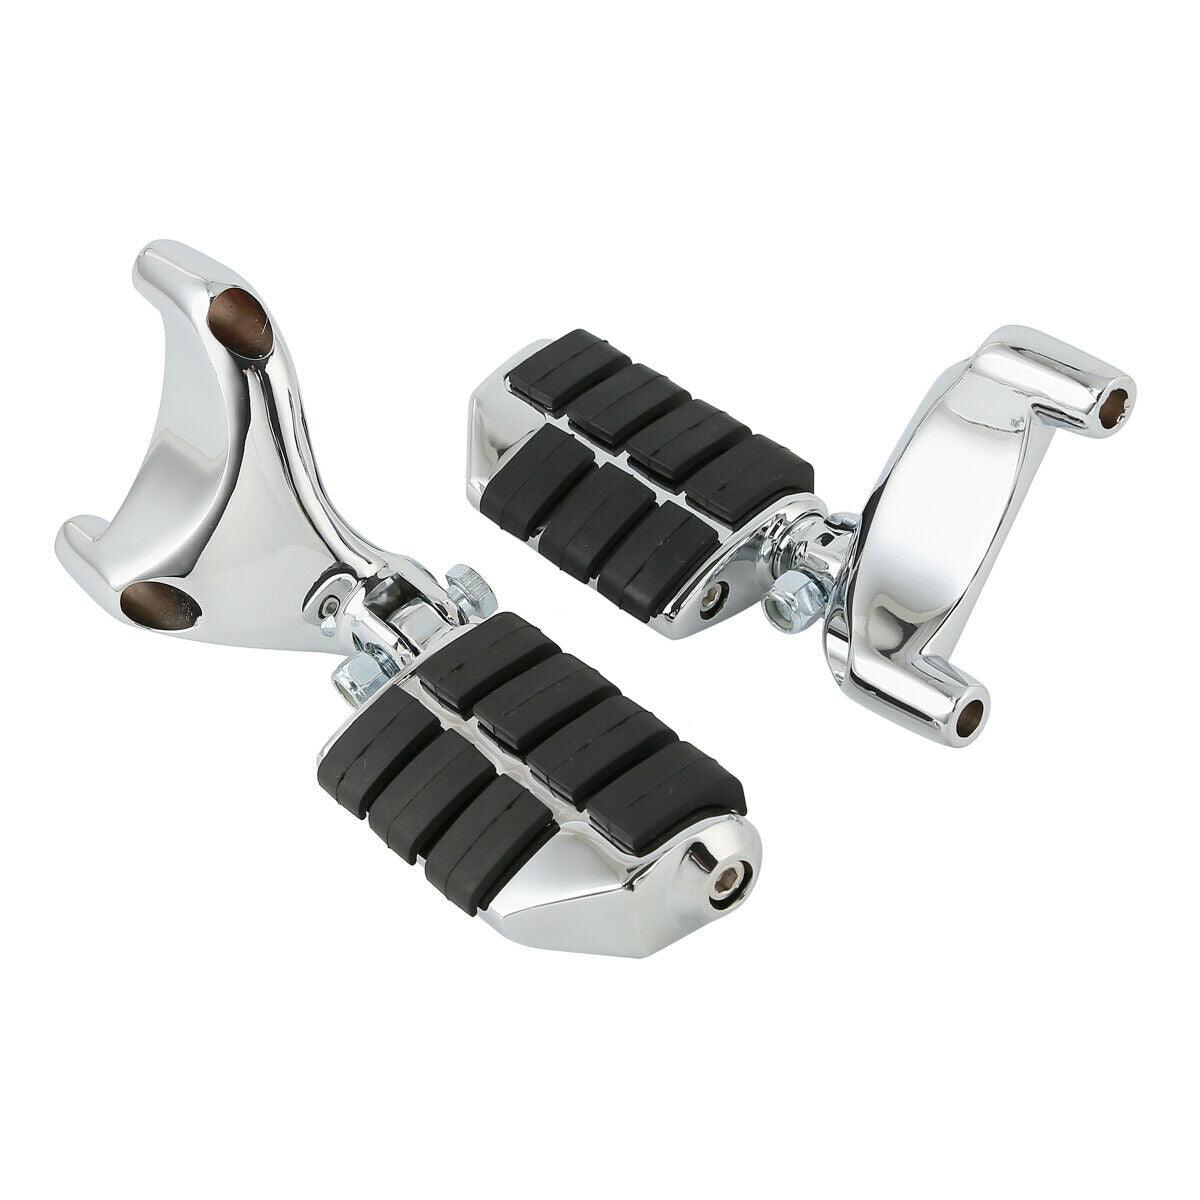 Passenger Foot Pegs Footrest Mount Fit For Harley Sportster XL883 1200 04-13 12 - Moto Life Products